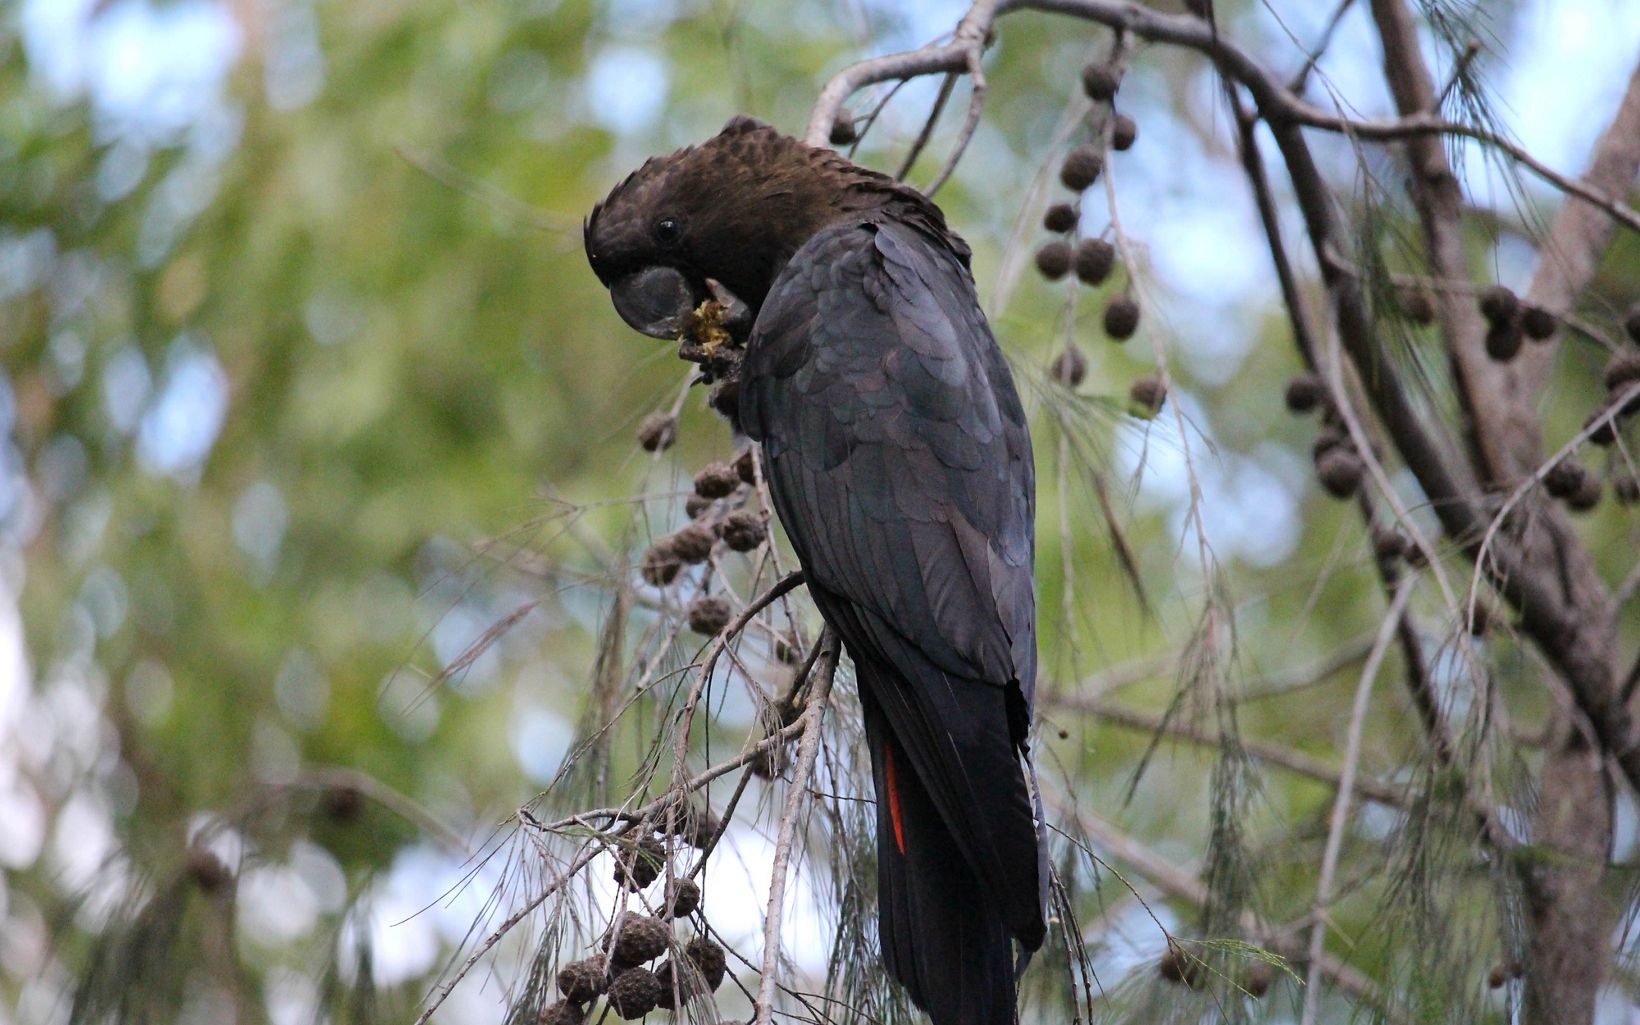 Glossy Black-cockatoo has had much of its habitat destroyed by Australia's disastrous bushfire season in 2019/2020 that burnt 10 million hectares of habitat © Calista Cameron